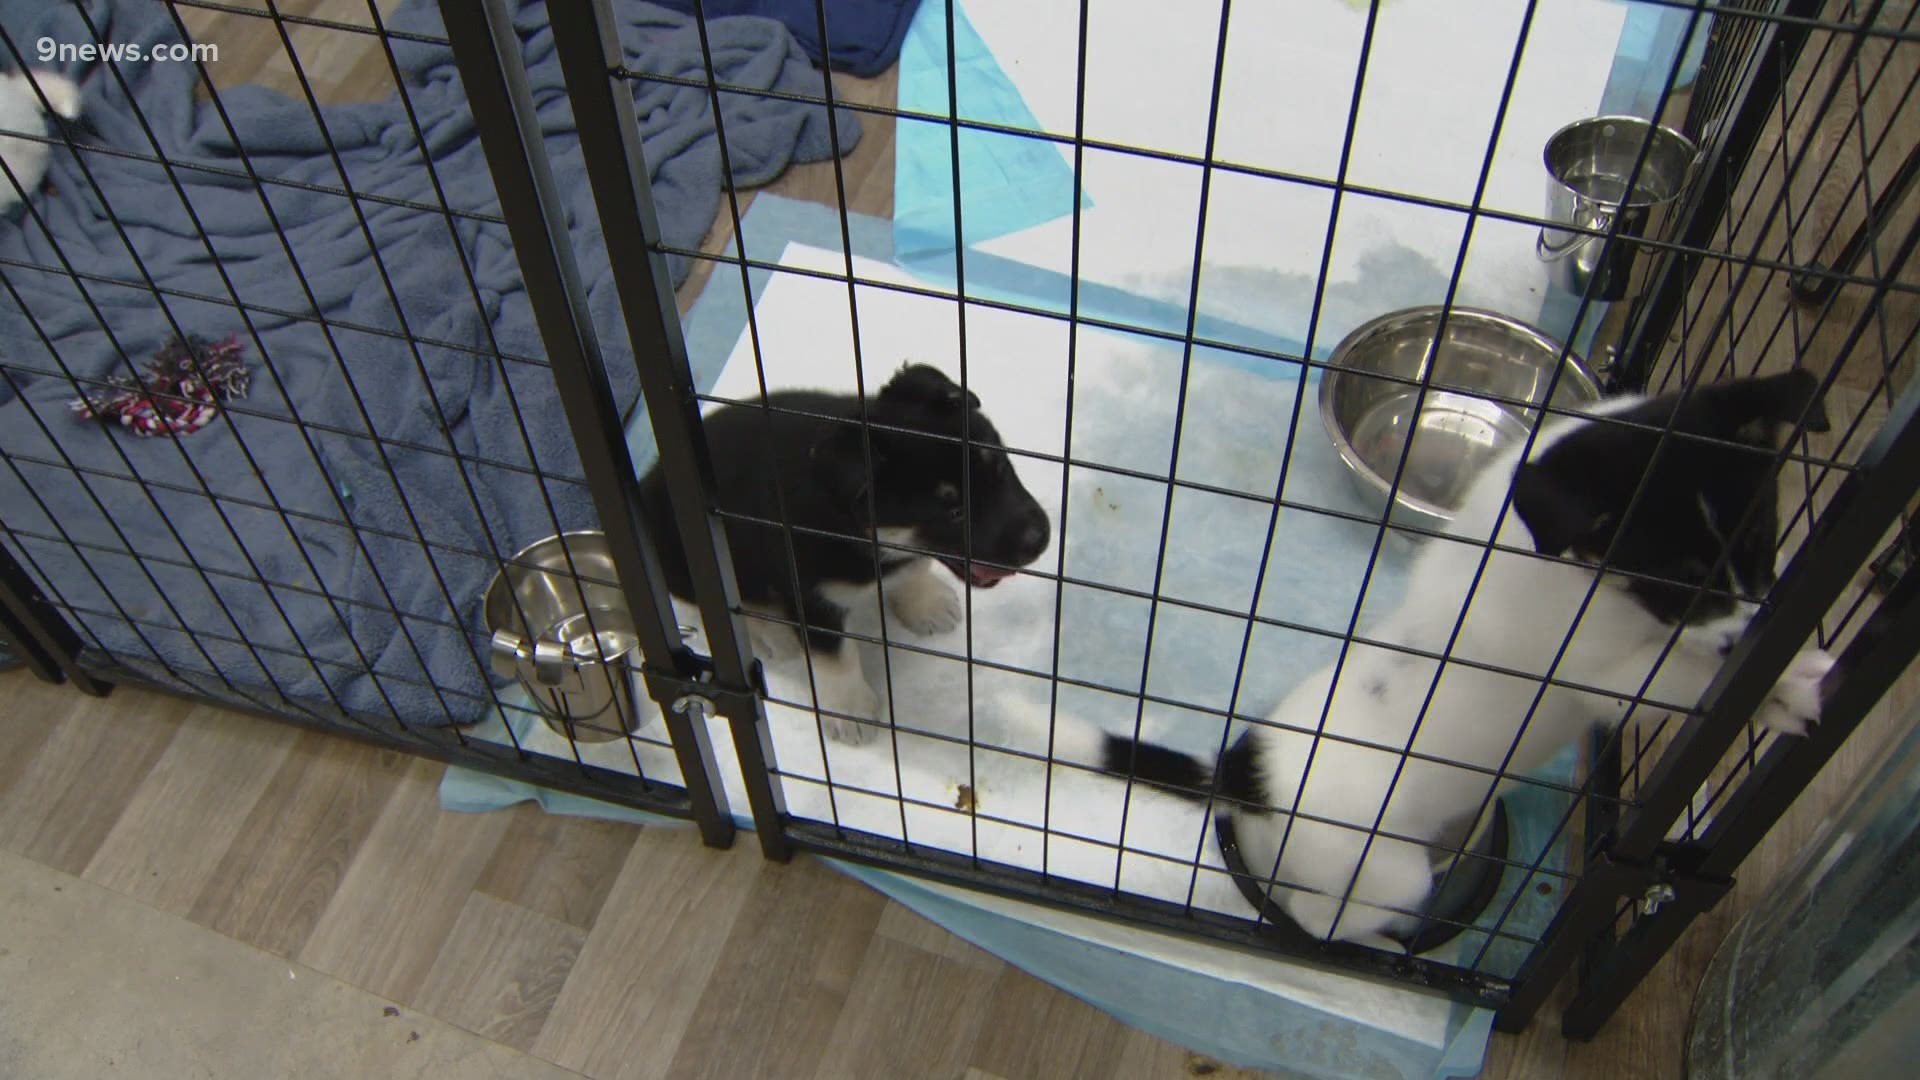 The rescue hopes to find forever homes for all 109 dogs from Texas.